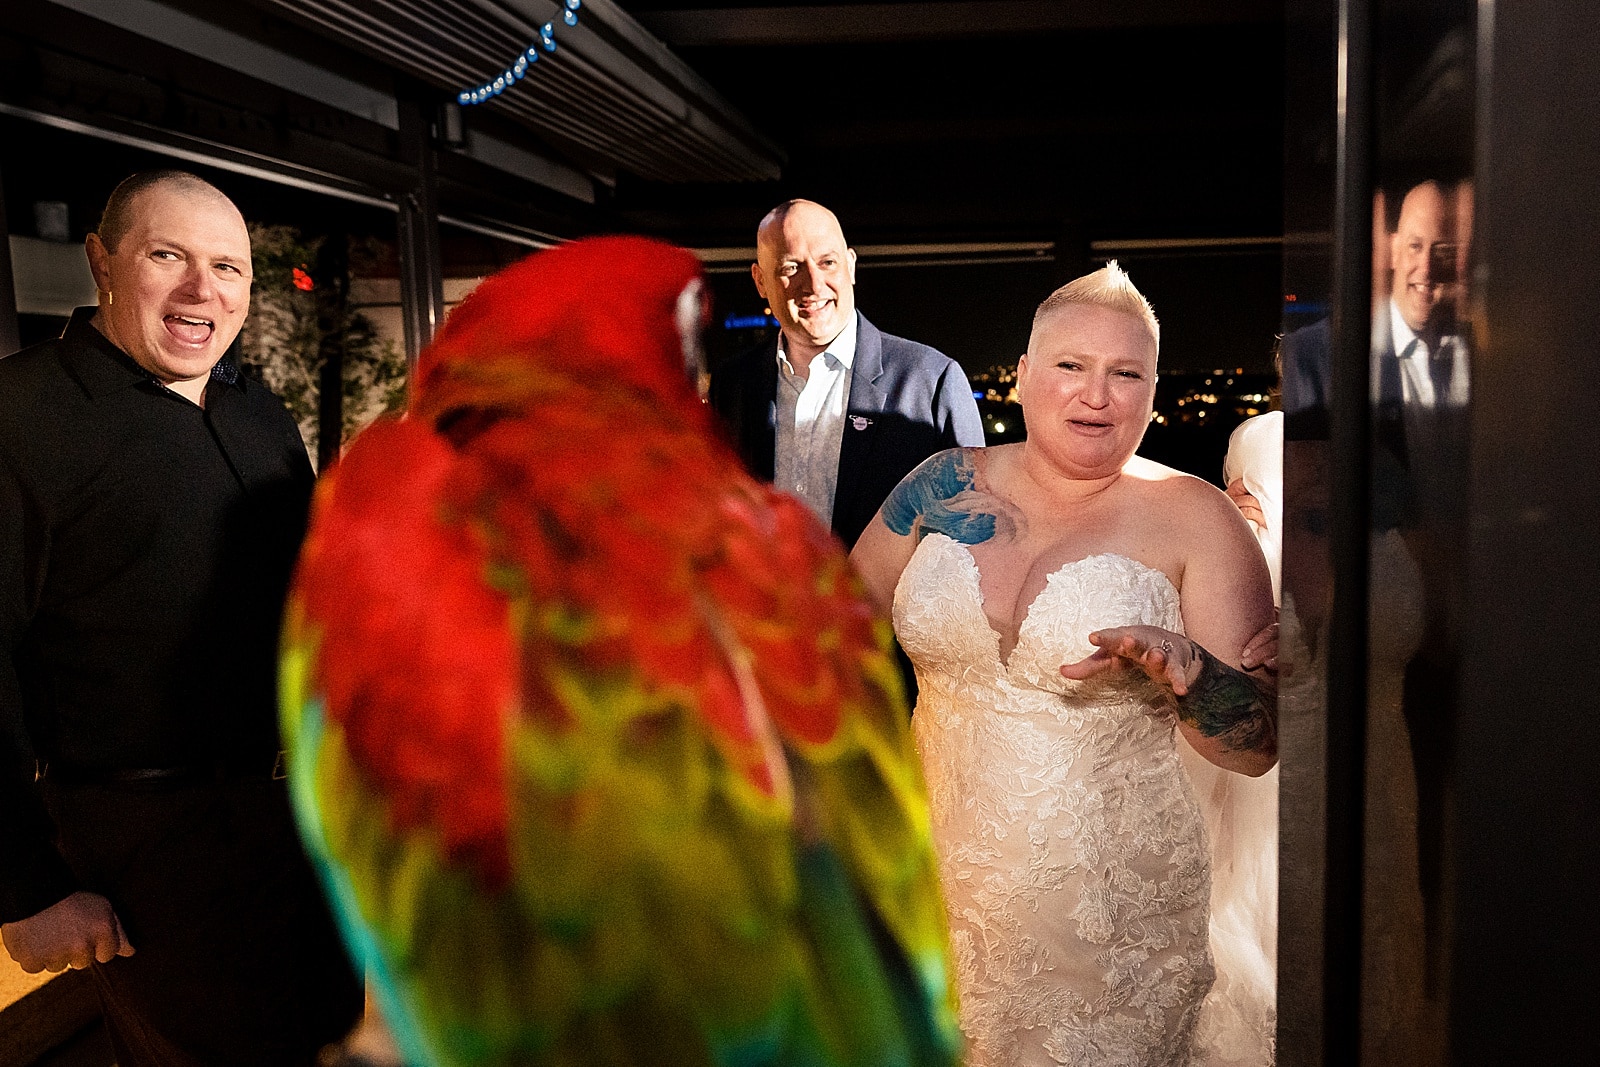 Merlot the parrot is an ambassador at the Hyatt Regency Grand Cypress in Orlando and he was a surprise guest at this destination wedding